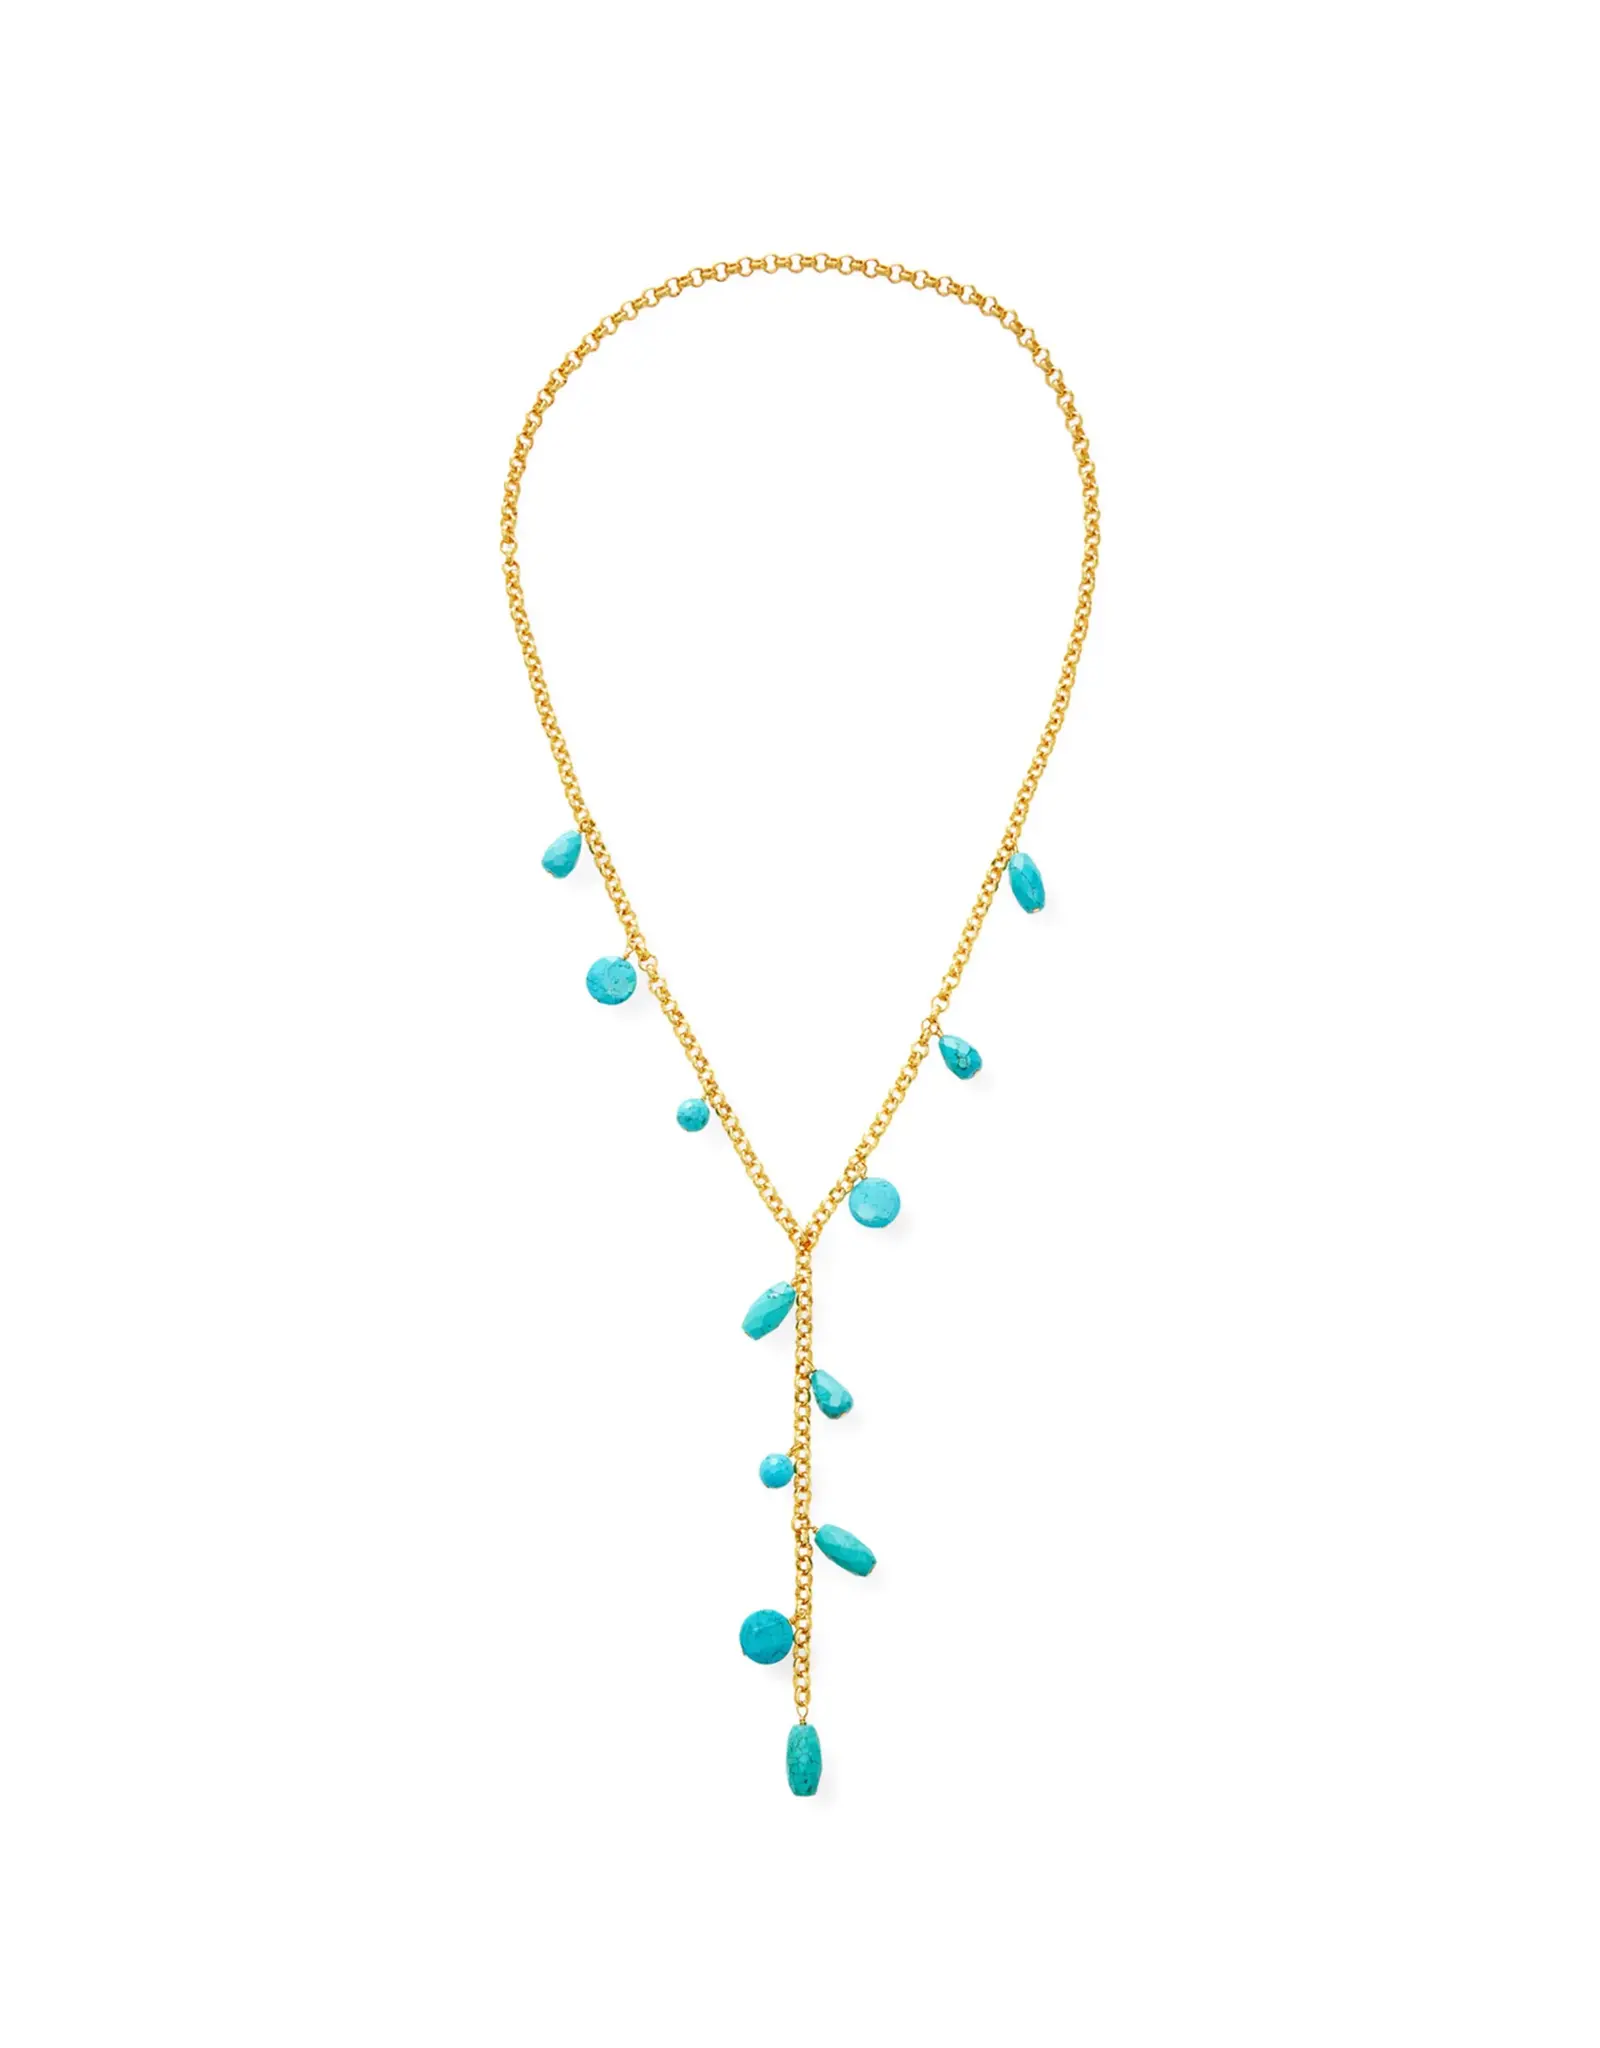 NEST Jewelry Nest  Long Gold Chain Y Necklace w/ Turquoise Charms